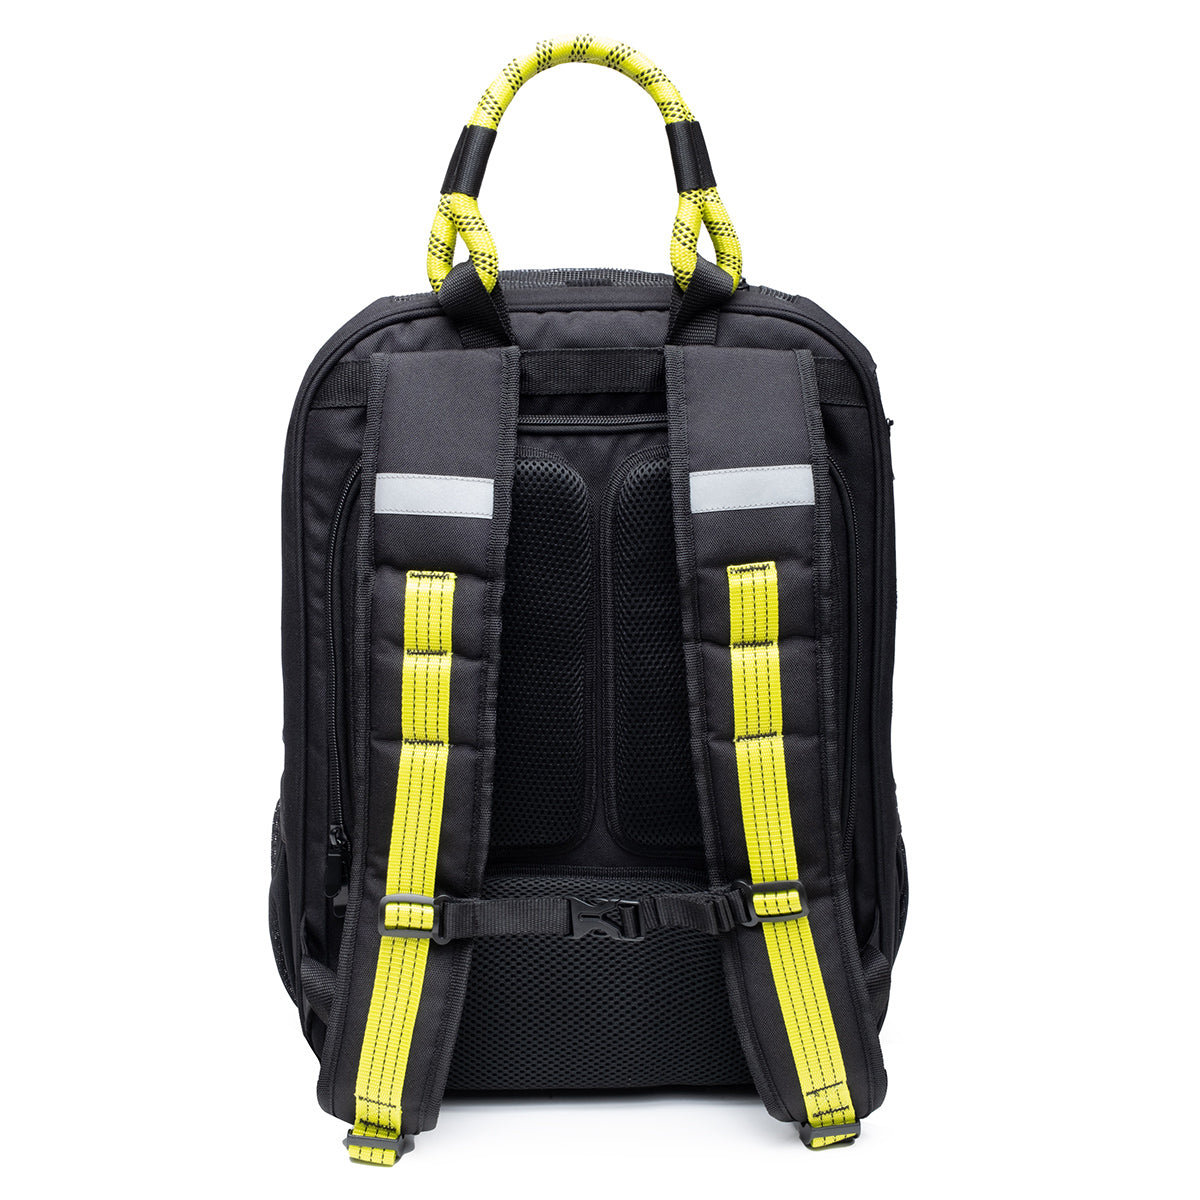 ROVERLUND Airline-Compliant Pet Backpack | Includes Laptop Storage | for Pets Up to 25lbs